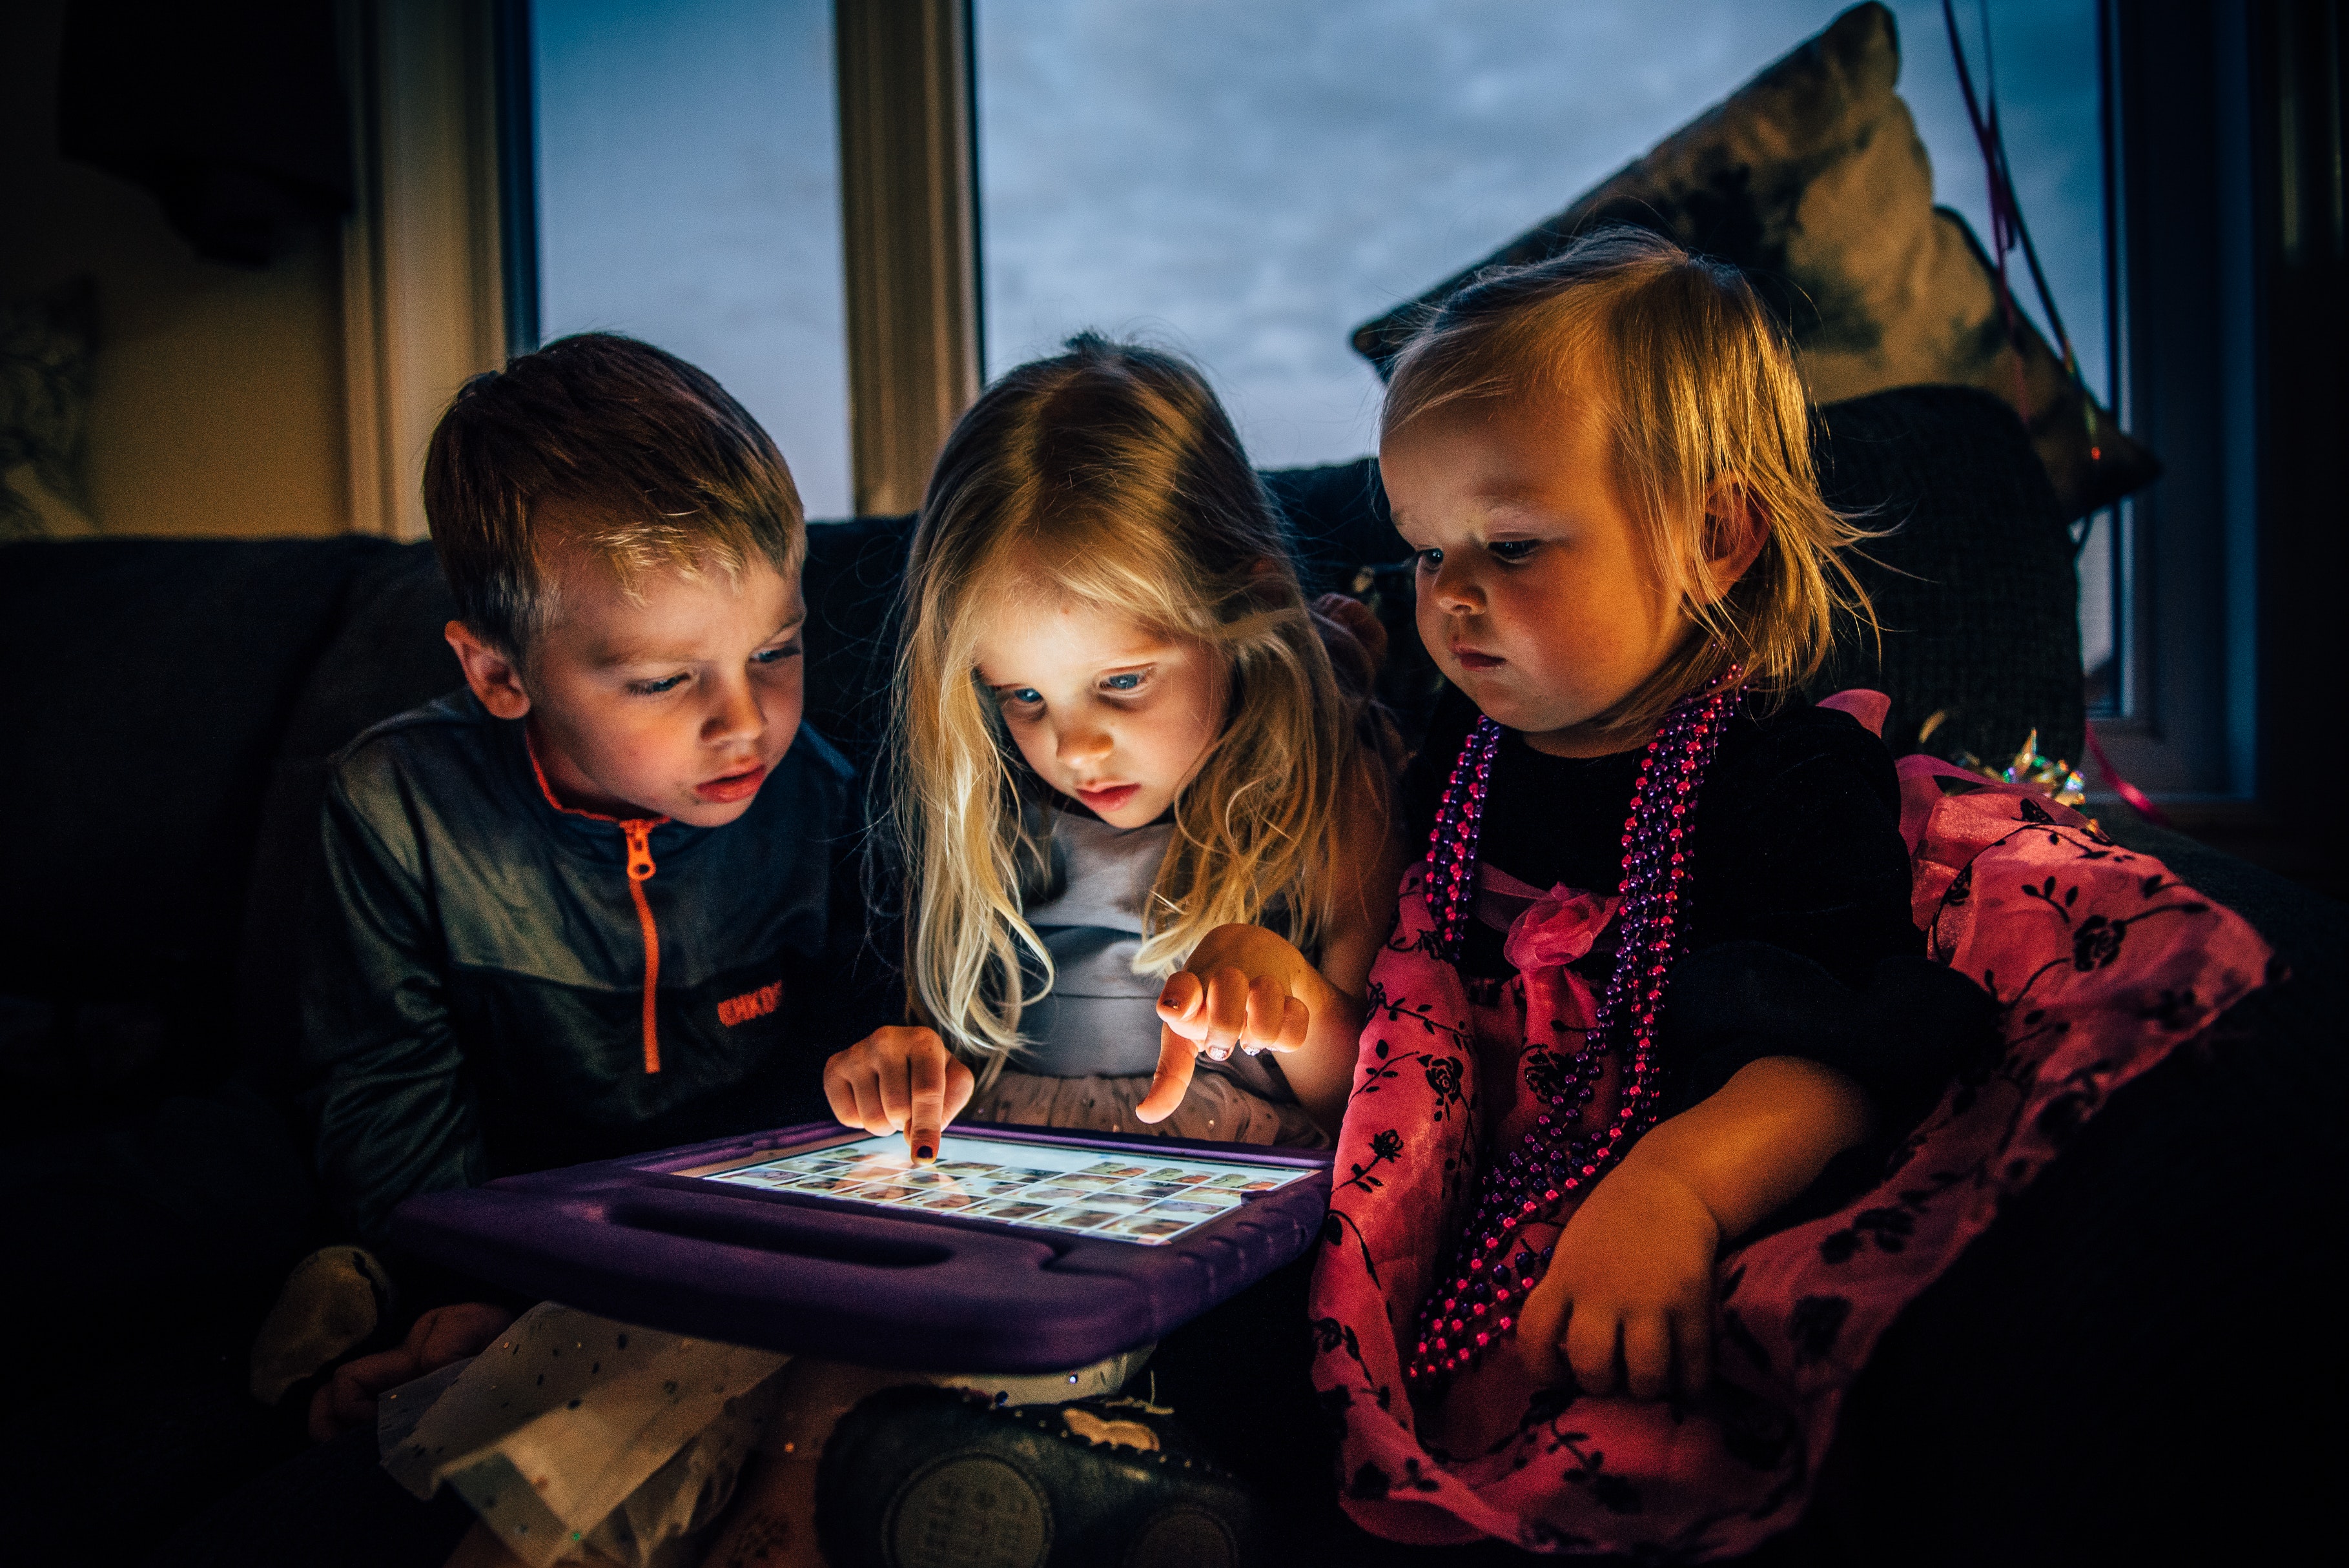 three-children-looking-at-a-tablet-computer-3536480.jpg